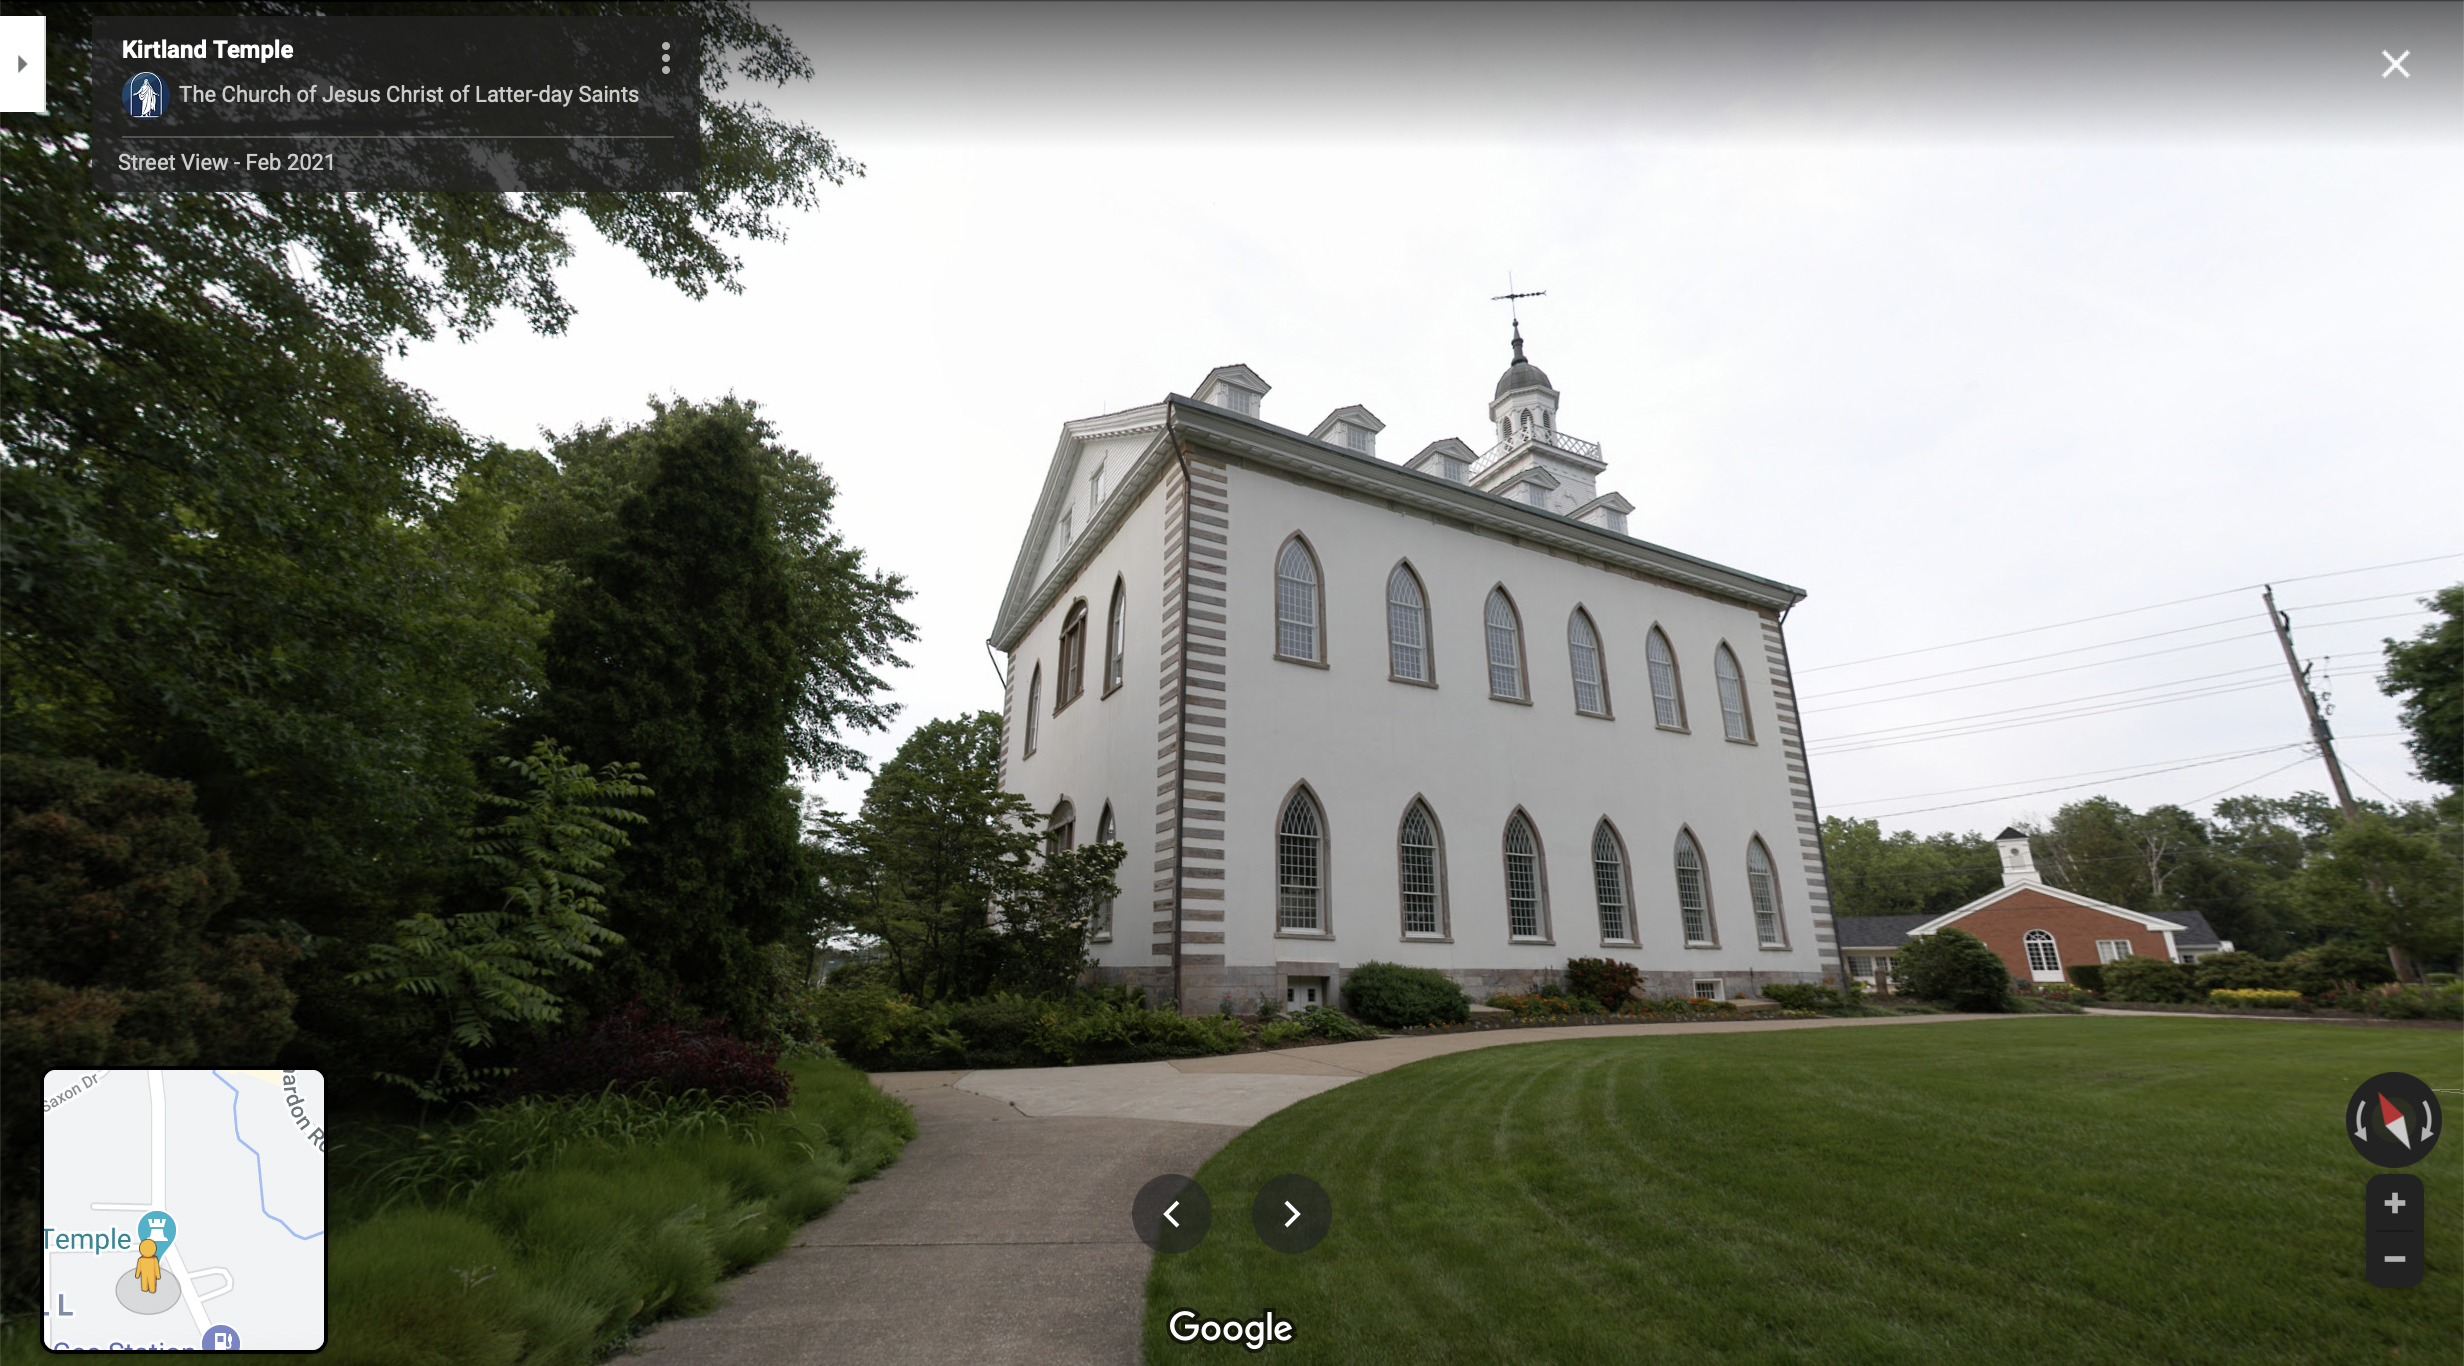 Screenshot of the Google Maps 360 view of the grounds of the Kirtland Temple